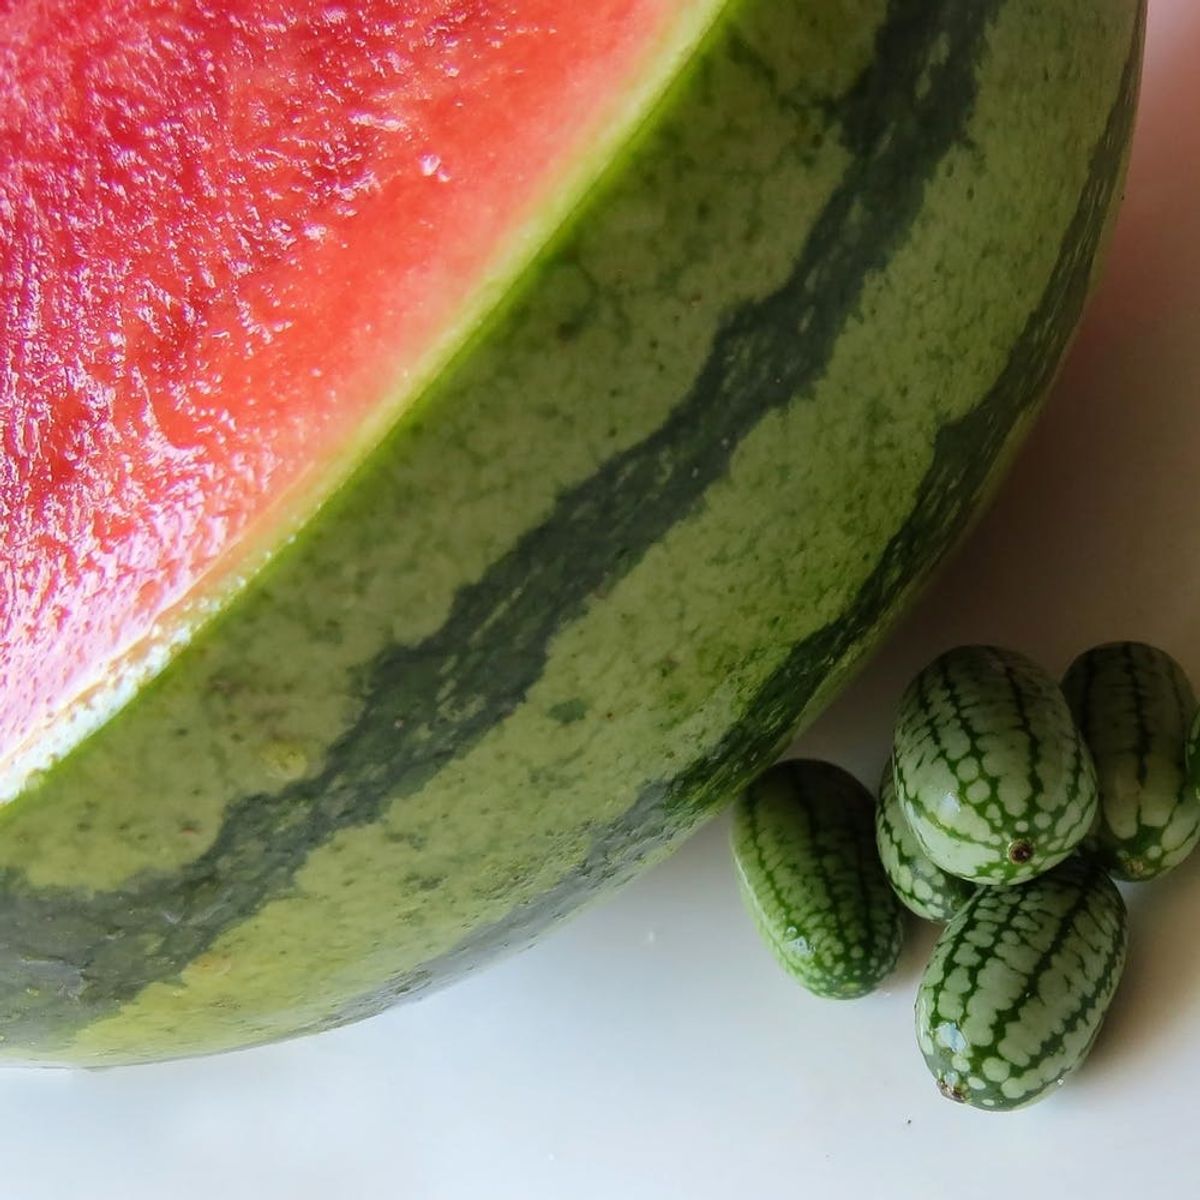 These Super-Tiny Watermelon-Like Cucamelons Are the CUTEST